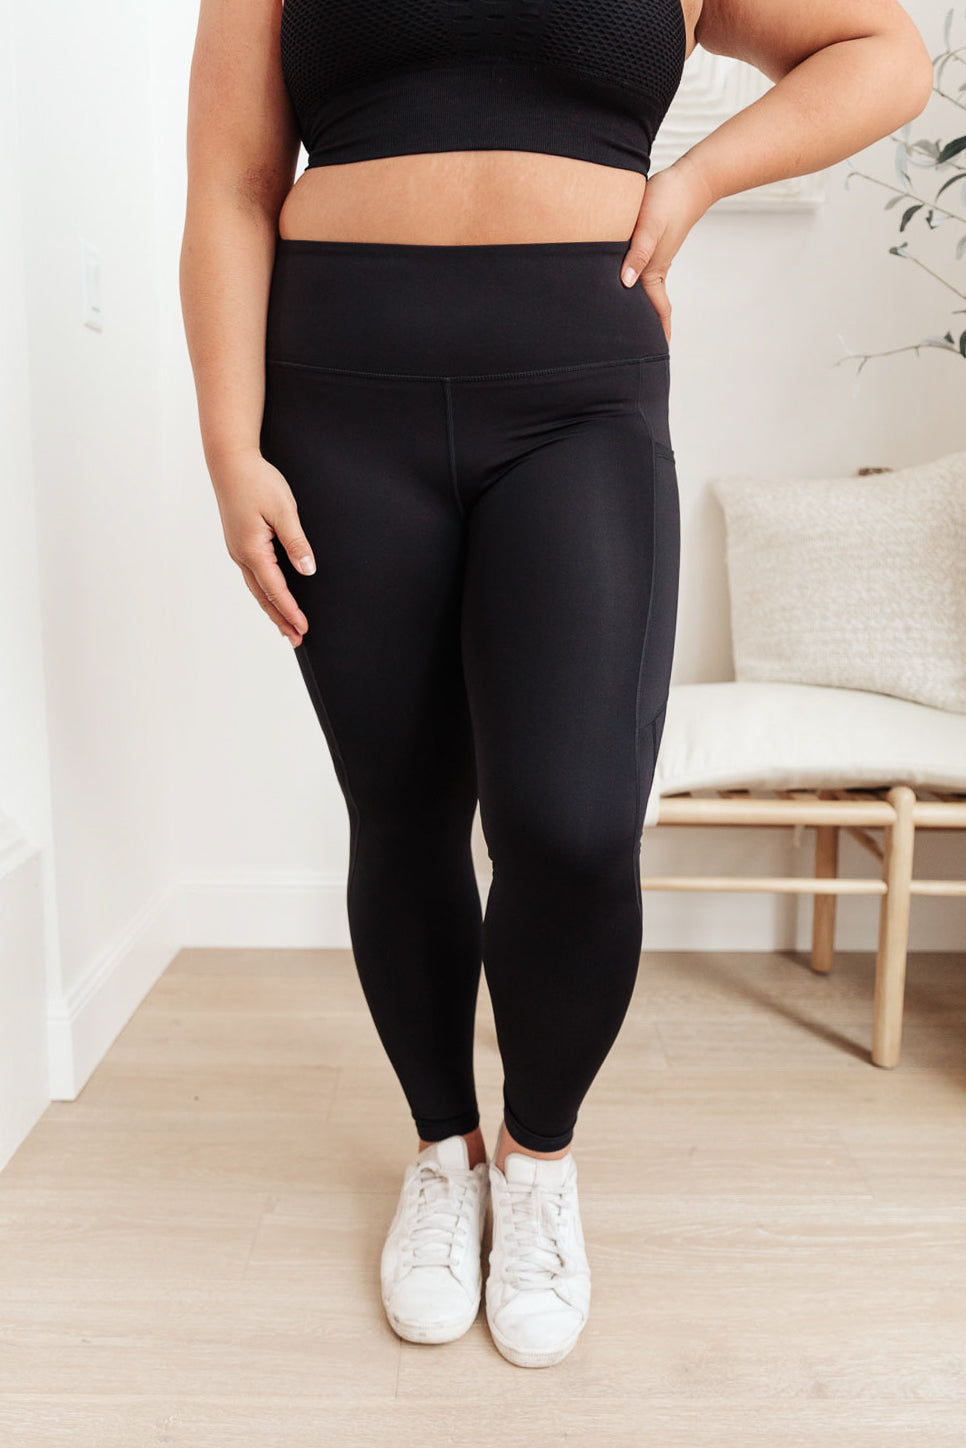 Buy Essential Training Tights by EHPlabs online - EHPlabs